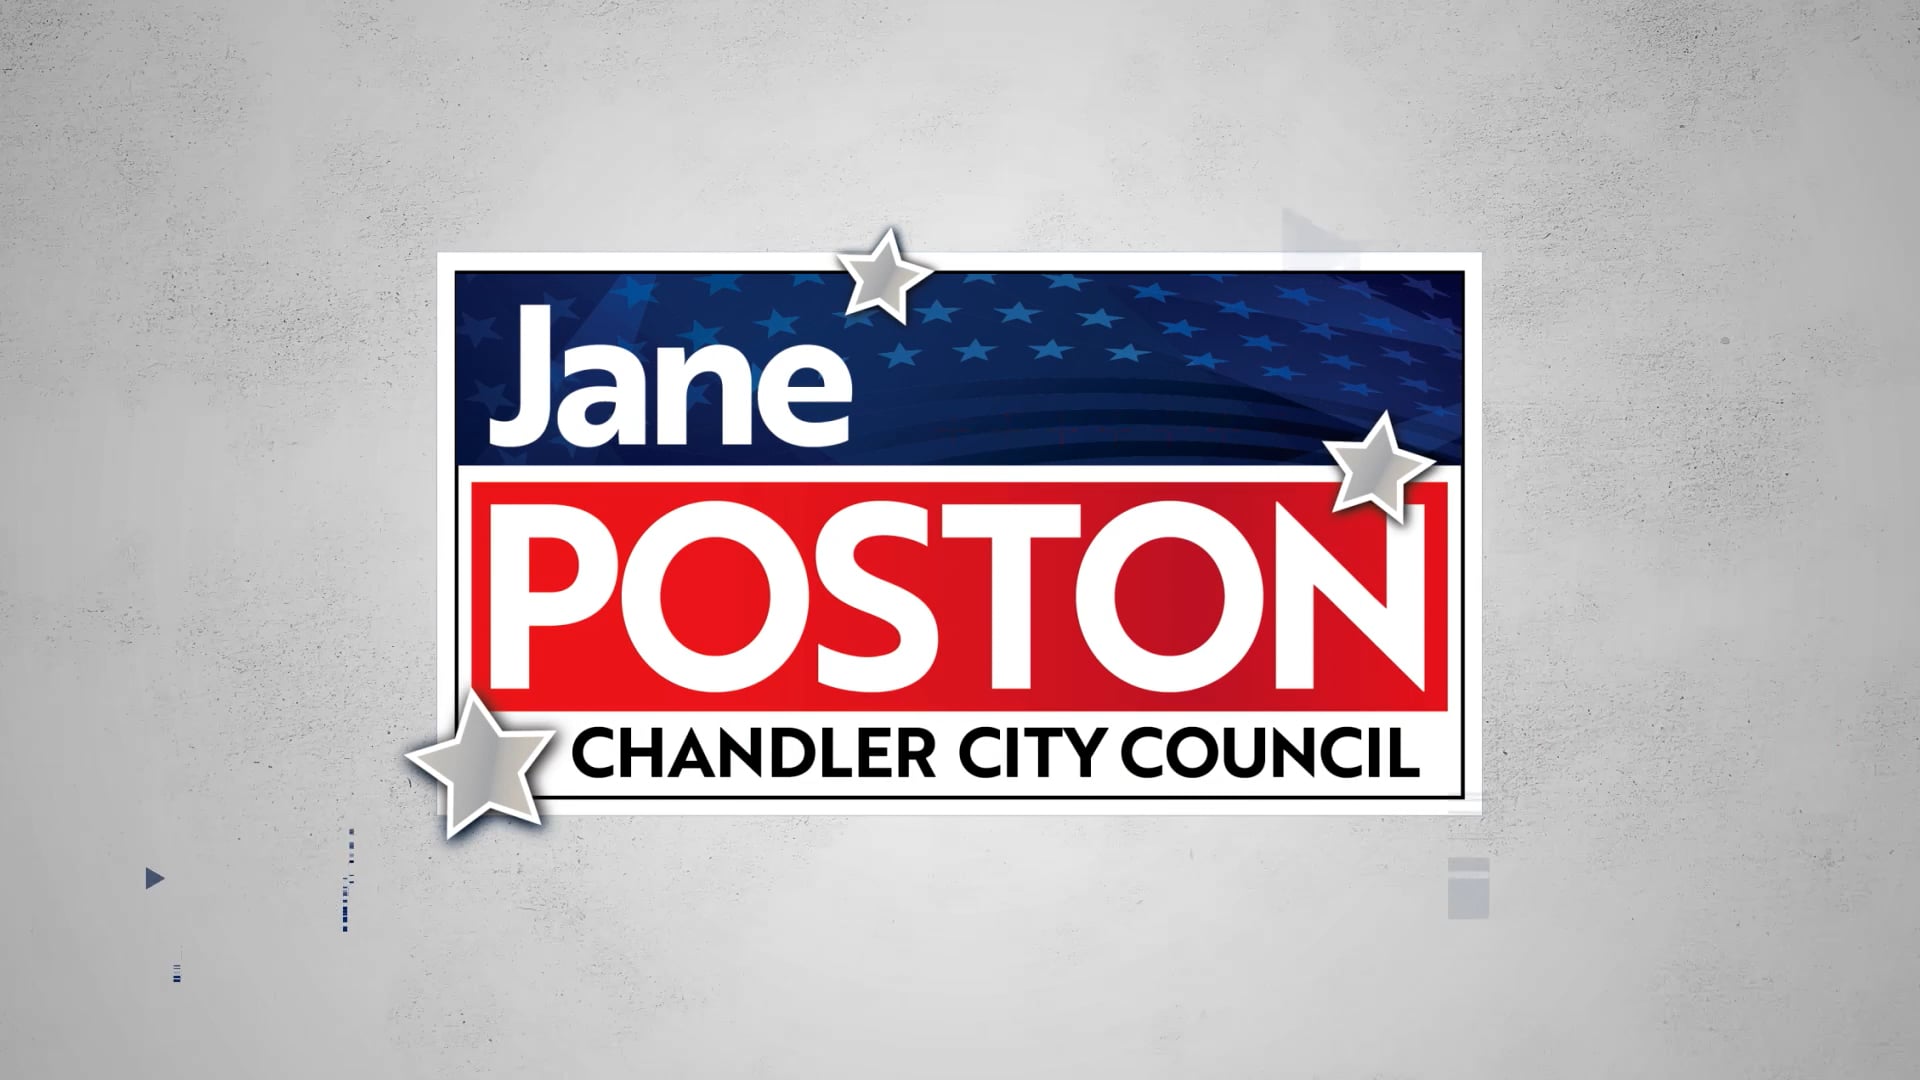 Jane Poston for Chandler City Council